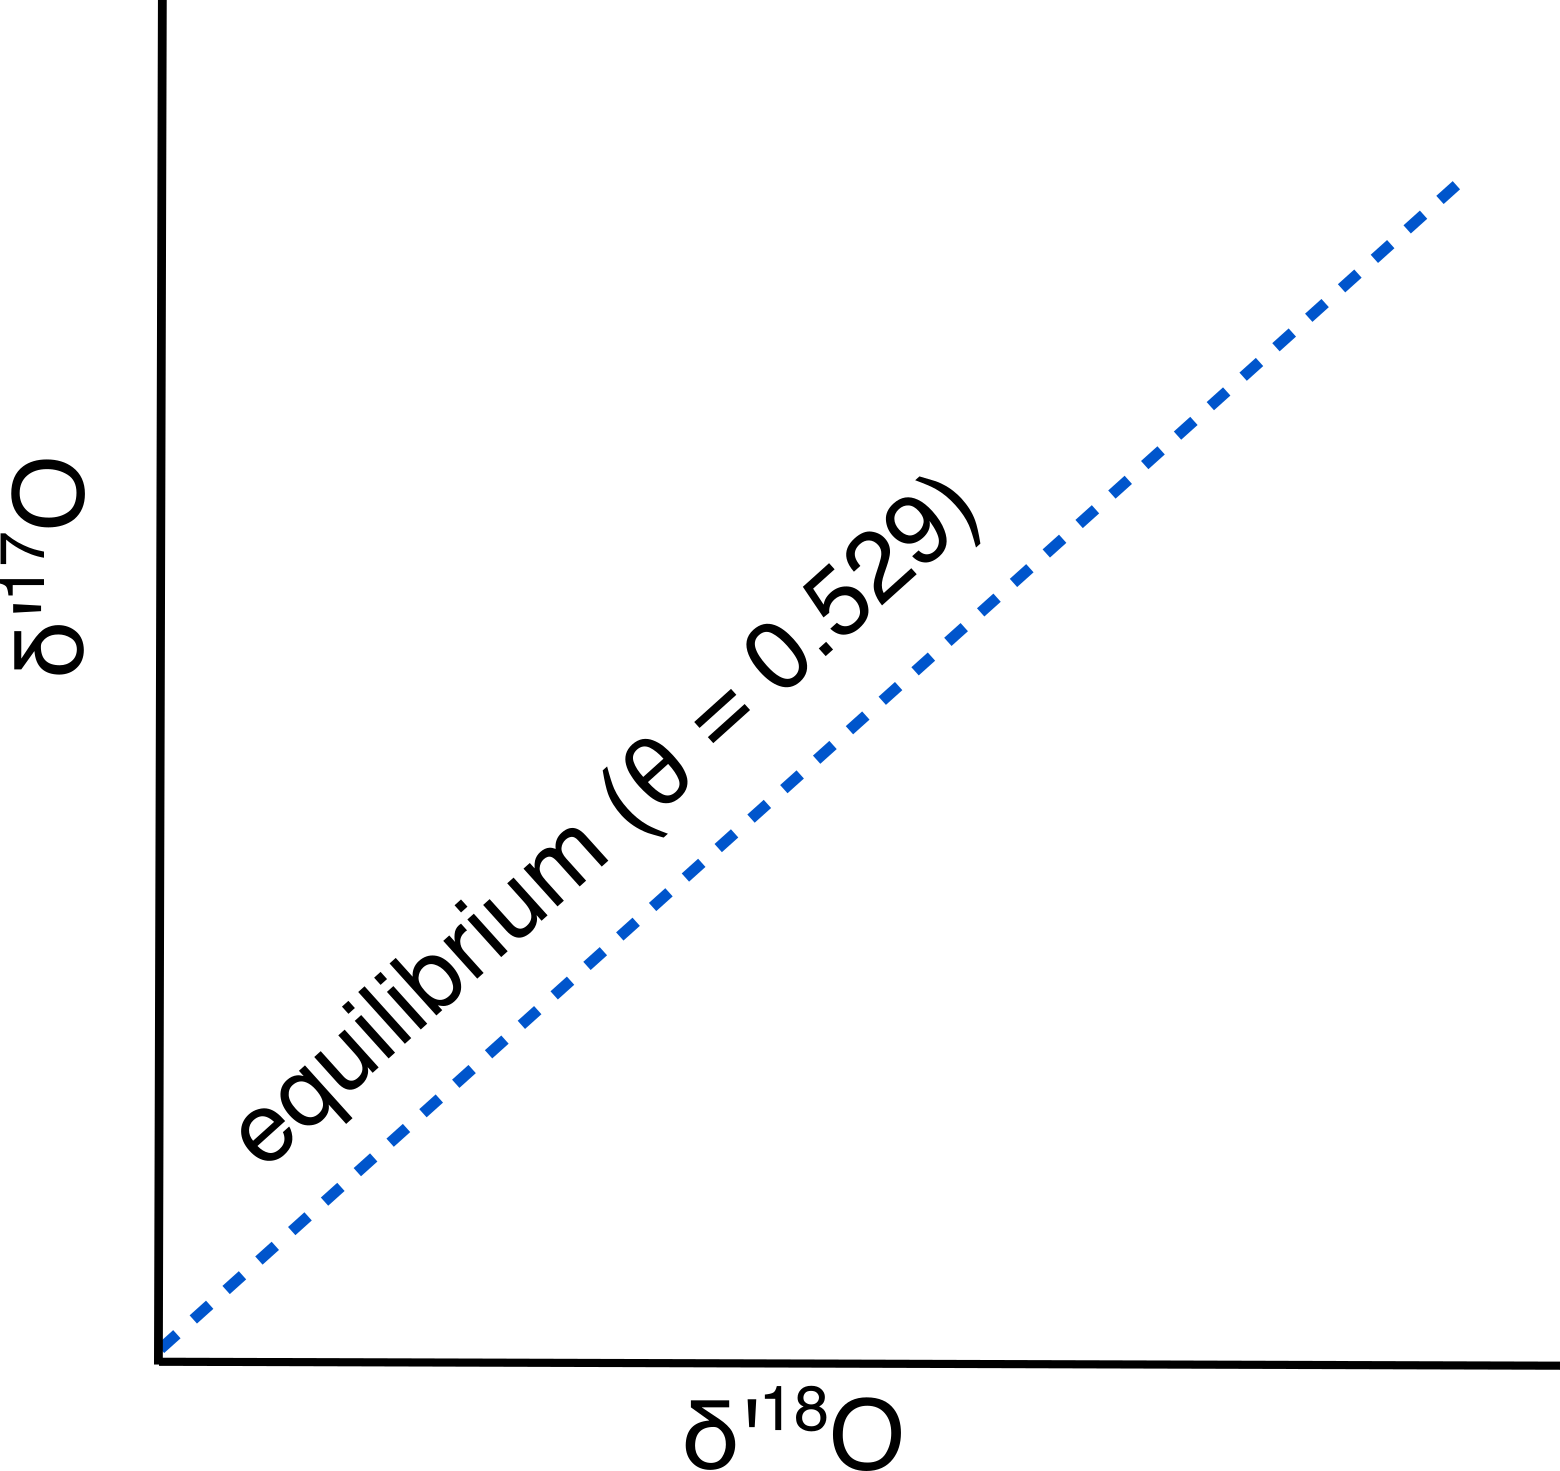 Figure 1: Predicted relationship between $\delta$'<sup>18</sup>O and $\delta$'<sup>17</sup>O given equilibrium fractionation. $\theta$<sub>a-b</sub>  = ln(<sup>17/16</sup> $\alpha$<sub>a-b</sub>)/ln(<sup>18/16</sup> $\alpha$<sub>a-b</sub>), where $\alpha$<sub>a-b</sub> is the fractionation factor between two phases (like calcite-water). 